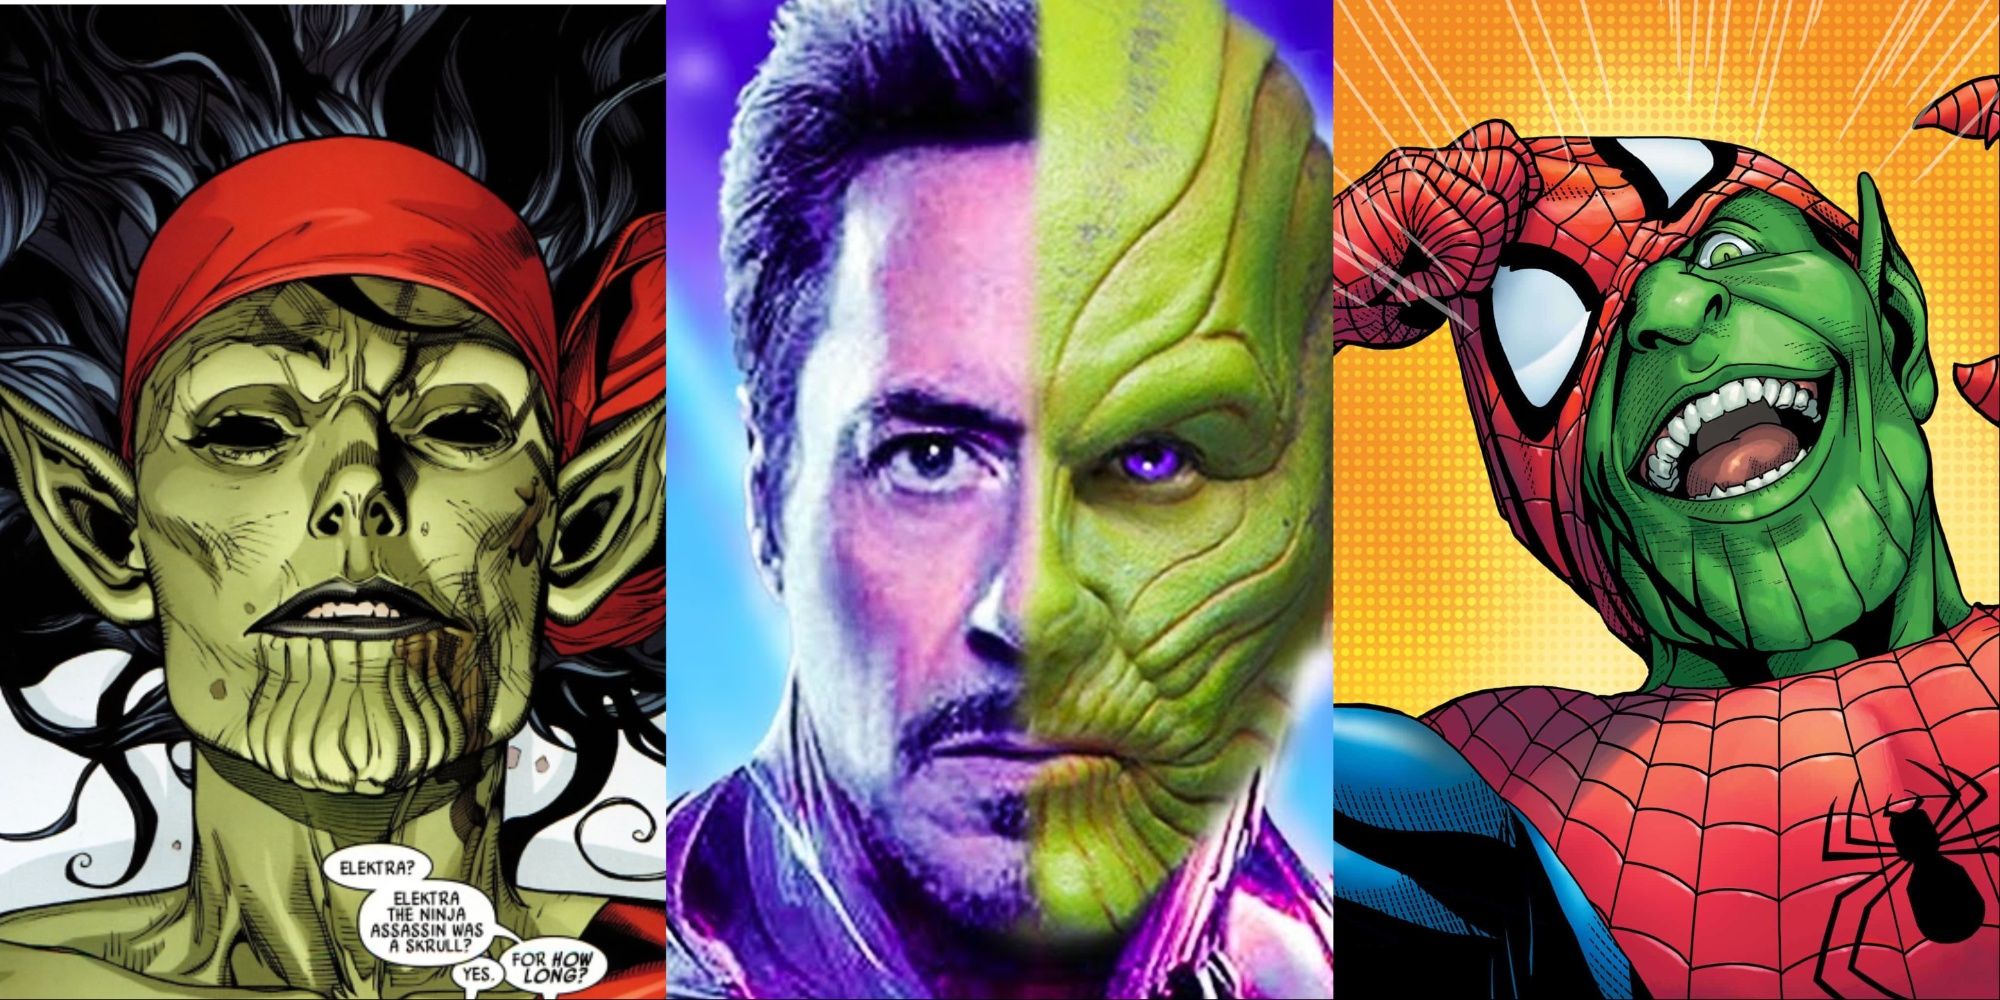 A split image of Electra and Spider-Man Skrulls from Marvel Comics and RDJ as an MCU Skrull